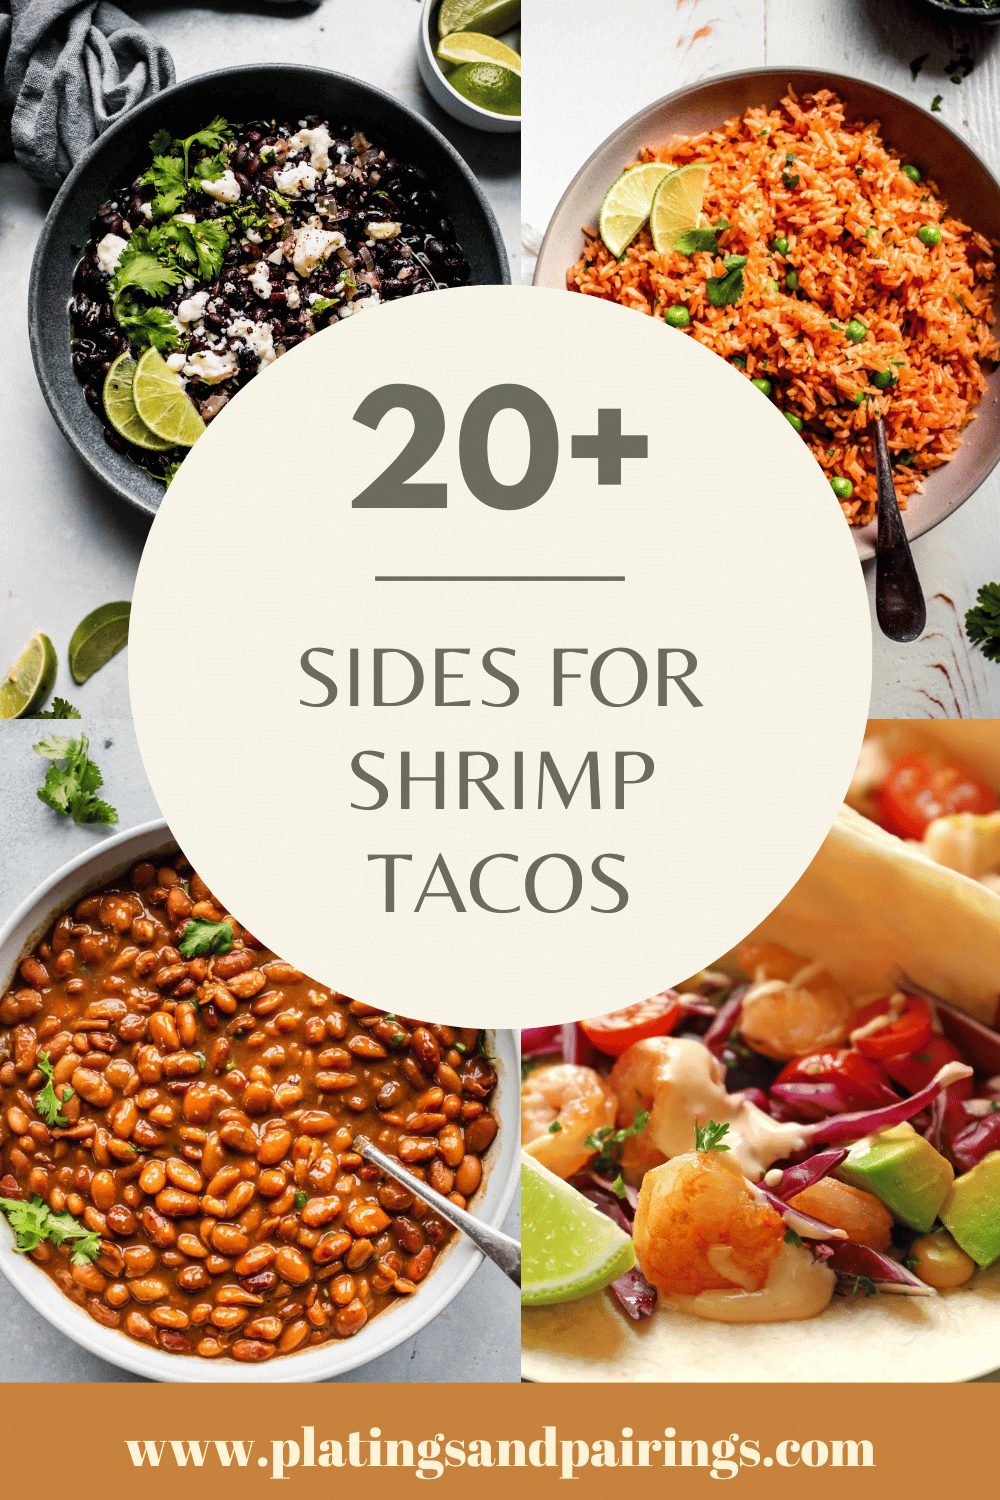 Collage of sides for shrimp tacos with text overlay.